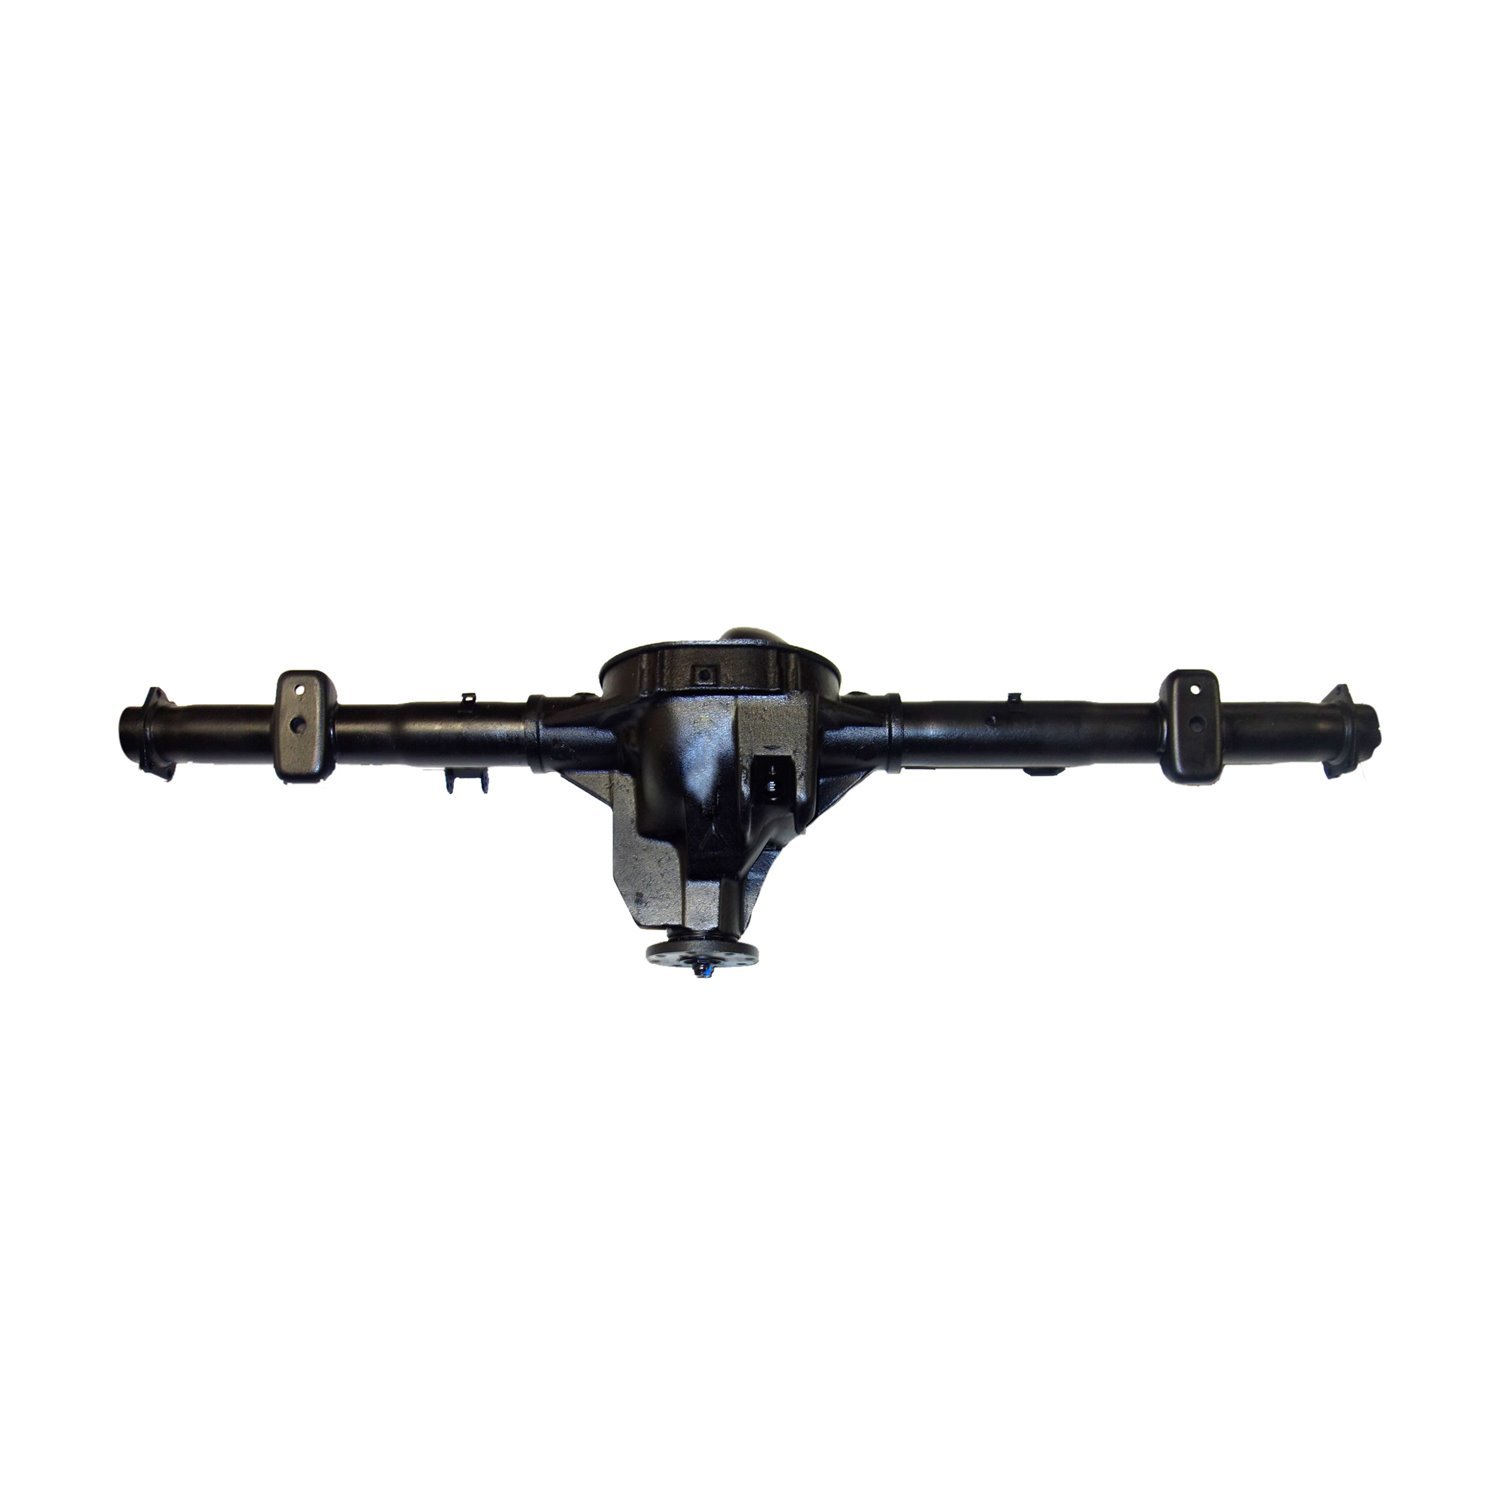 Remanufactured Complete Axle Assembly for 8.8" 1998 Ranger 3.73 , 10" Drum Brakes